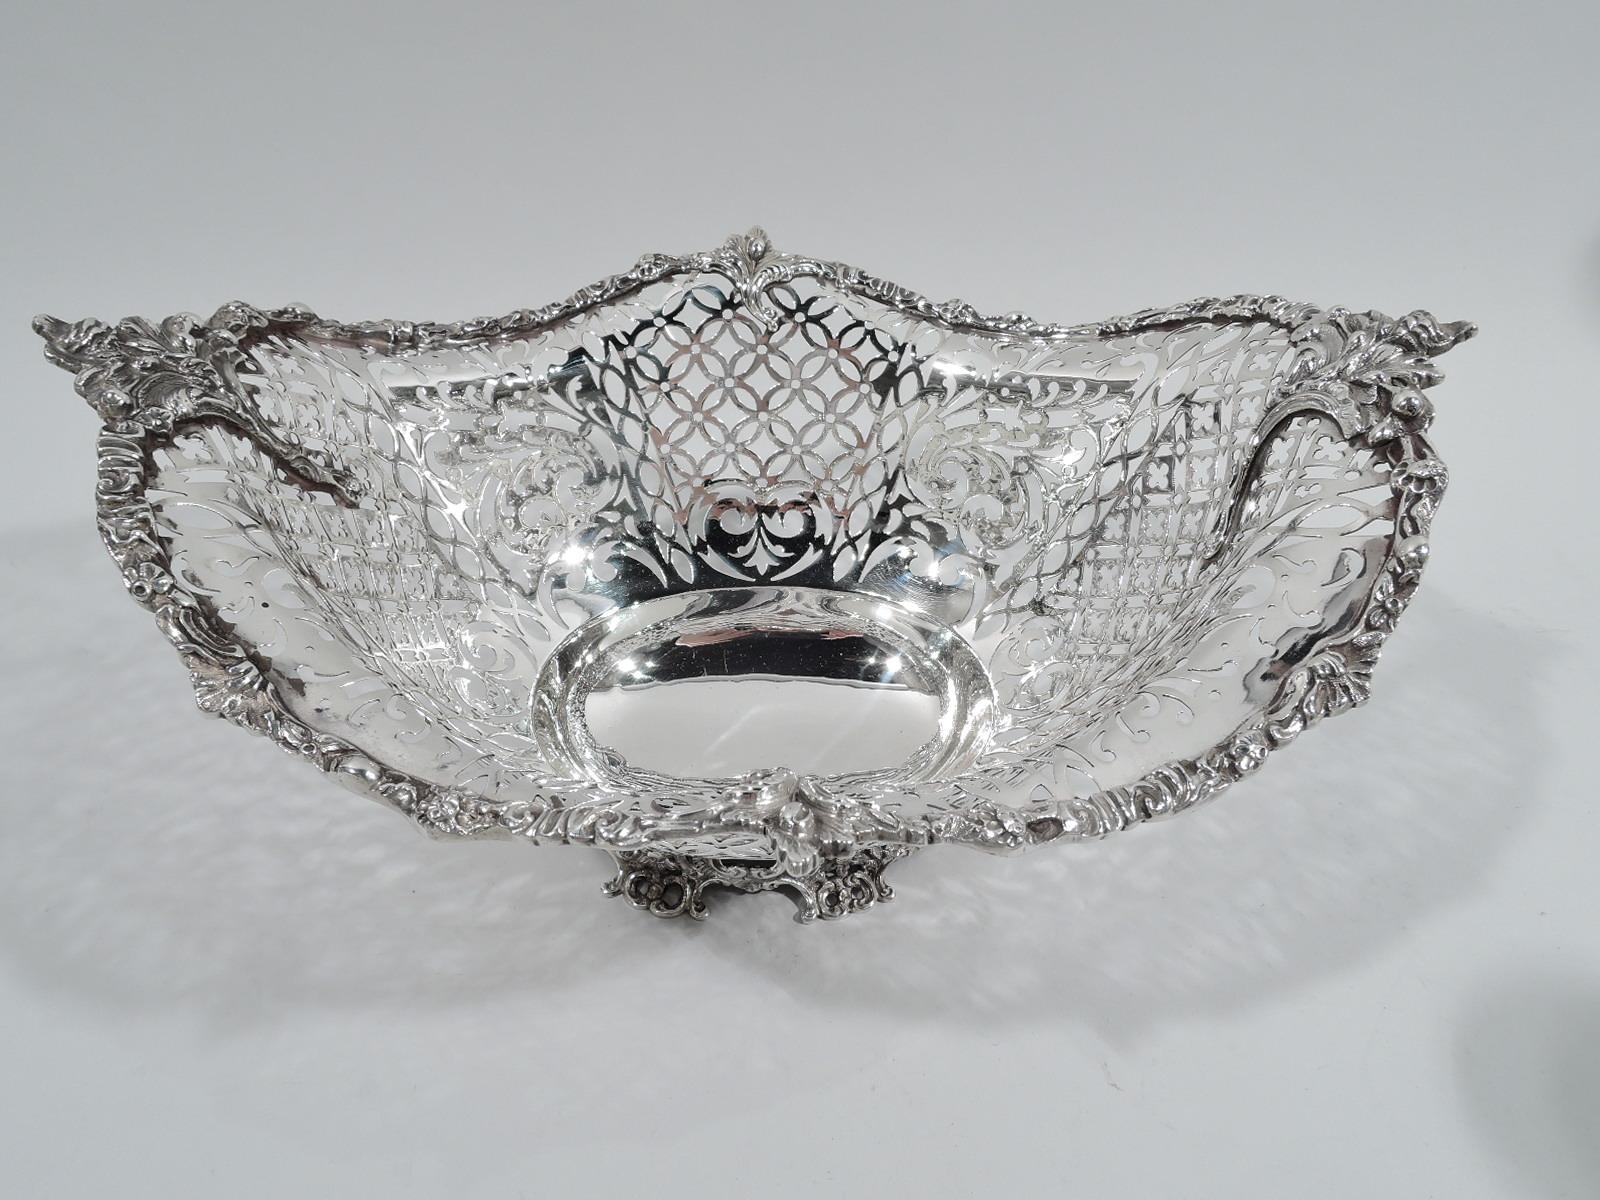 George V sterling silver bowl. Made by S. Blanckensee & Son Ltd in Birmingham in 1918. Solid oval well and tapering sides with pierced and open quatrefoils, scrollwork, and flowers. Wavy rim with tooled flowers, leaves, and scrolls; large stem